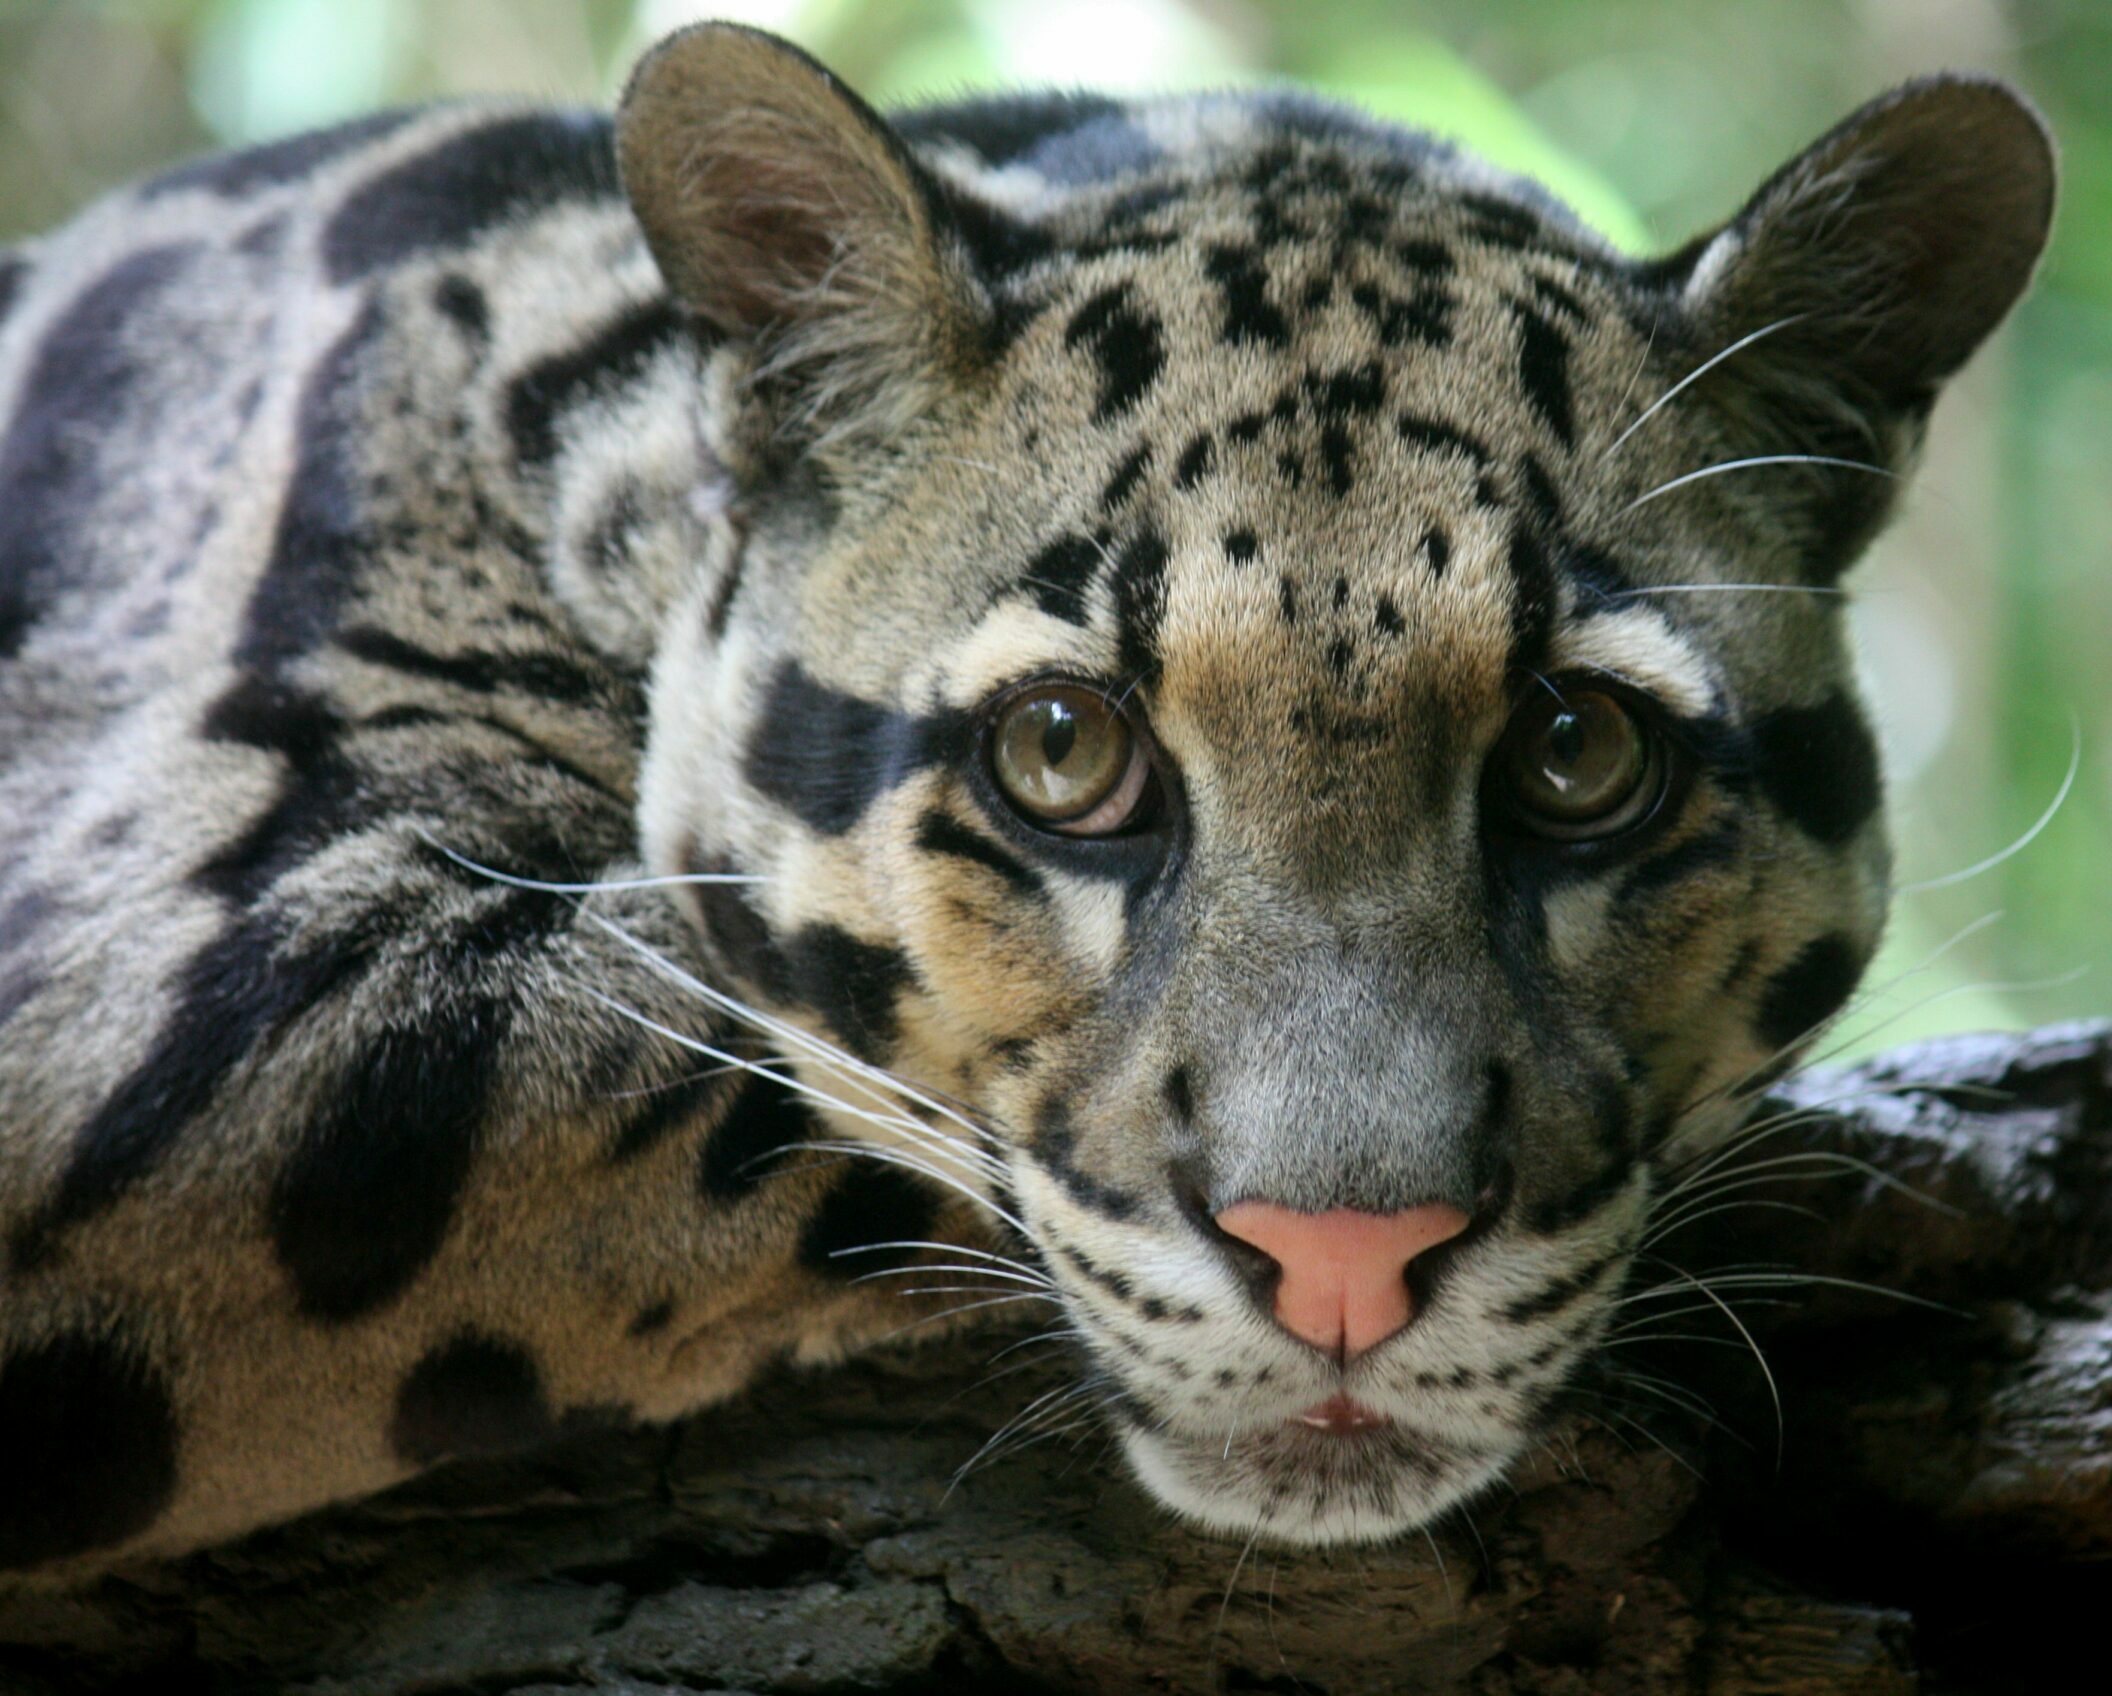 Four Rare Clouded Leopards Sighted in Nagaland